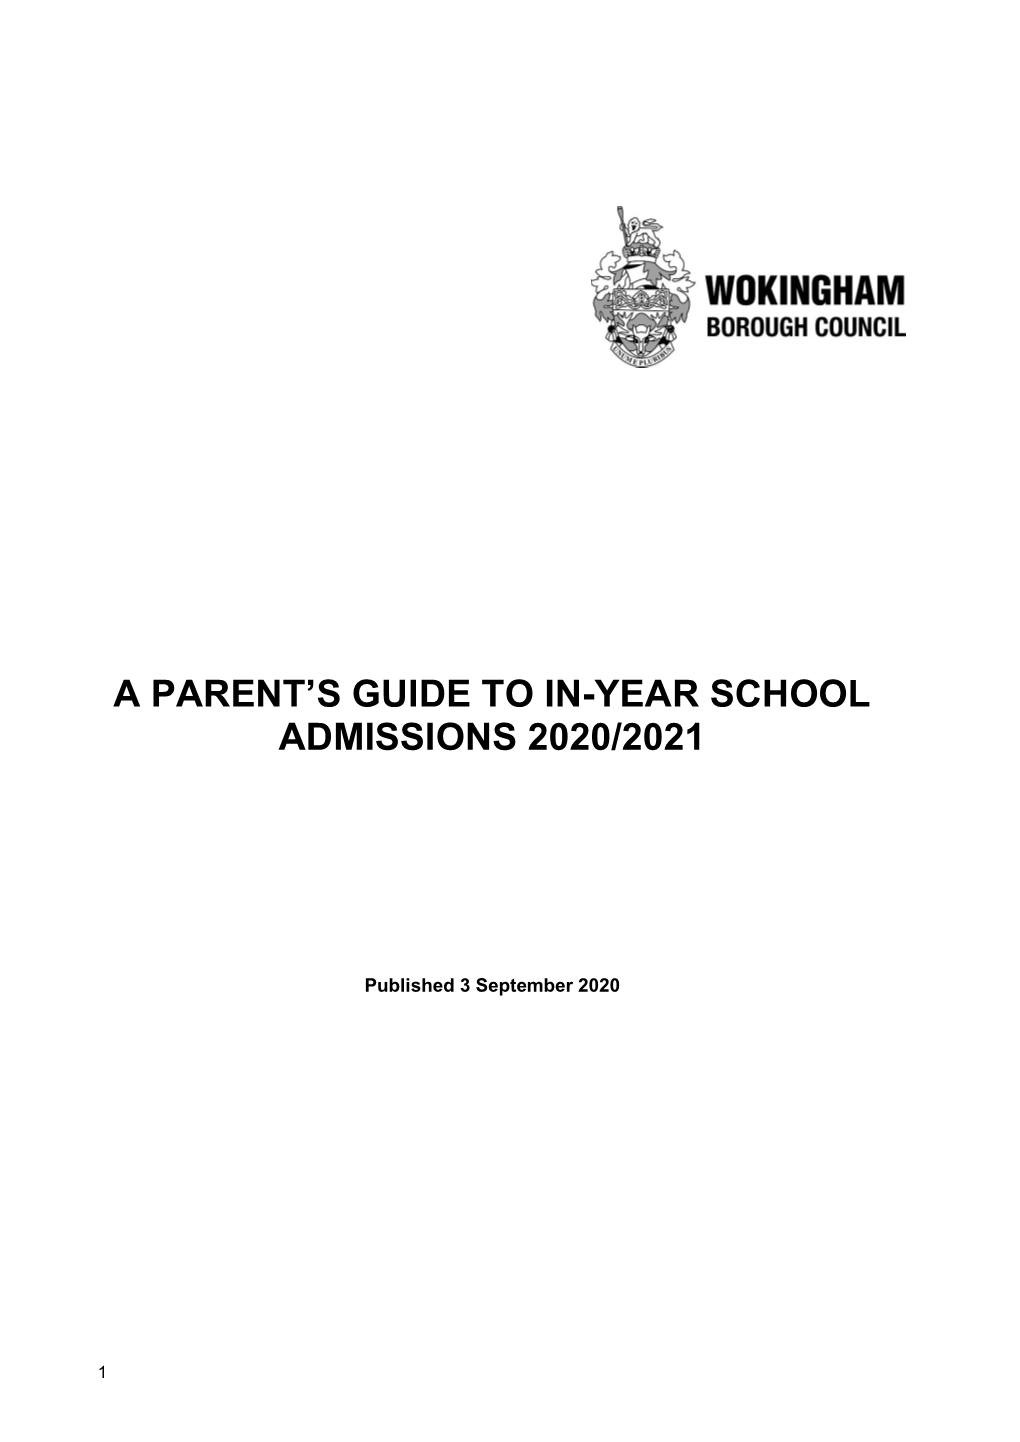 A Parent's Guide to In-Year School Admissions 2020/2021